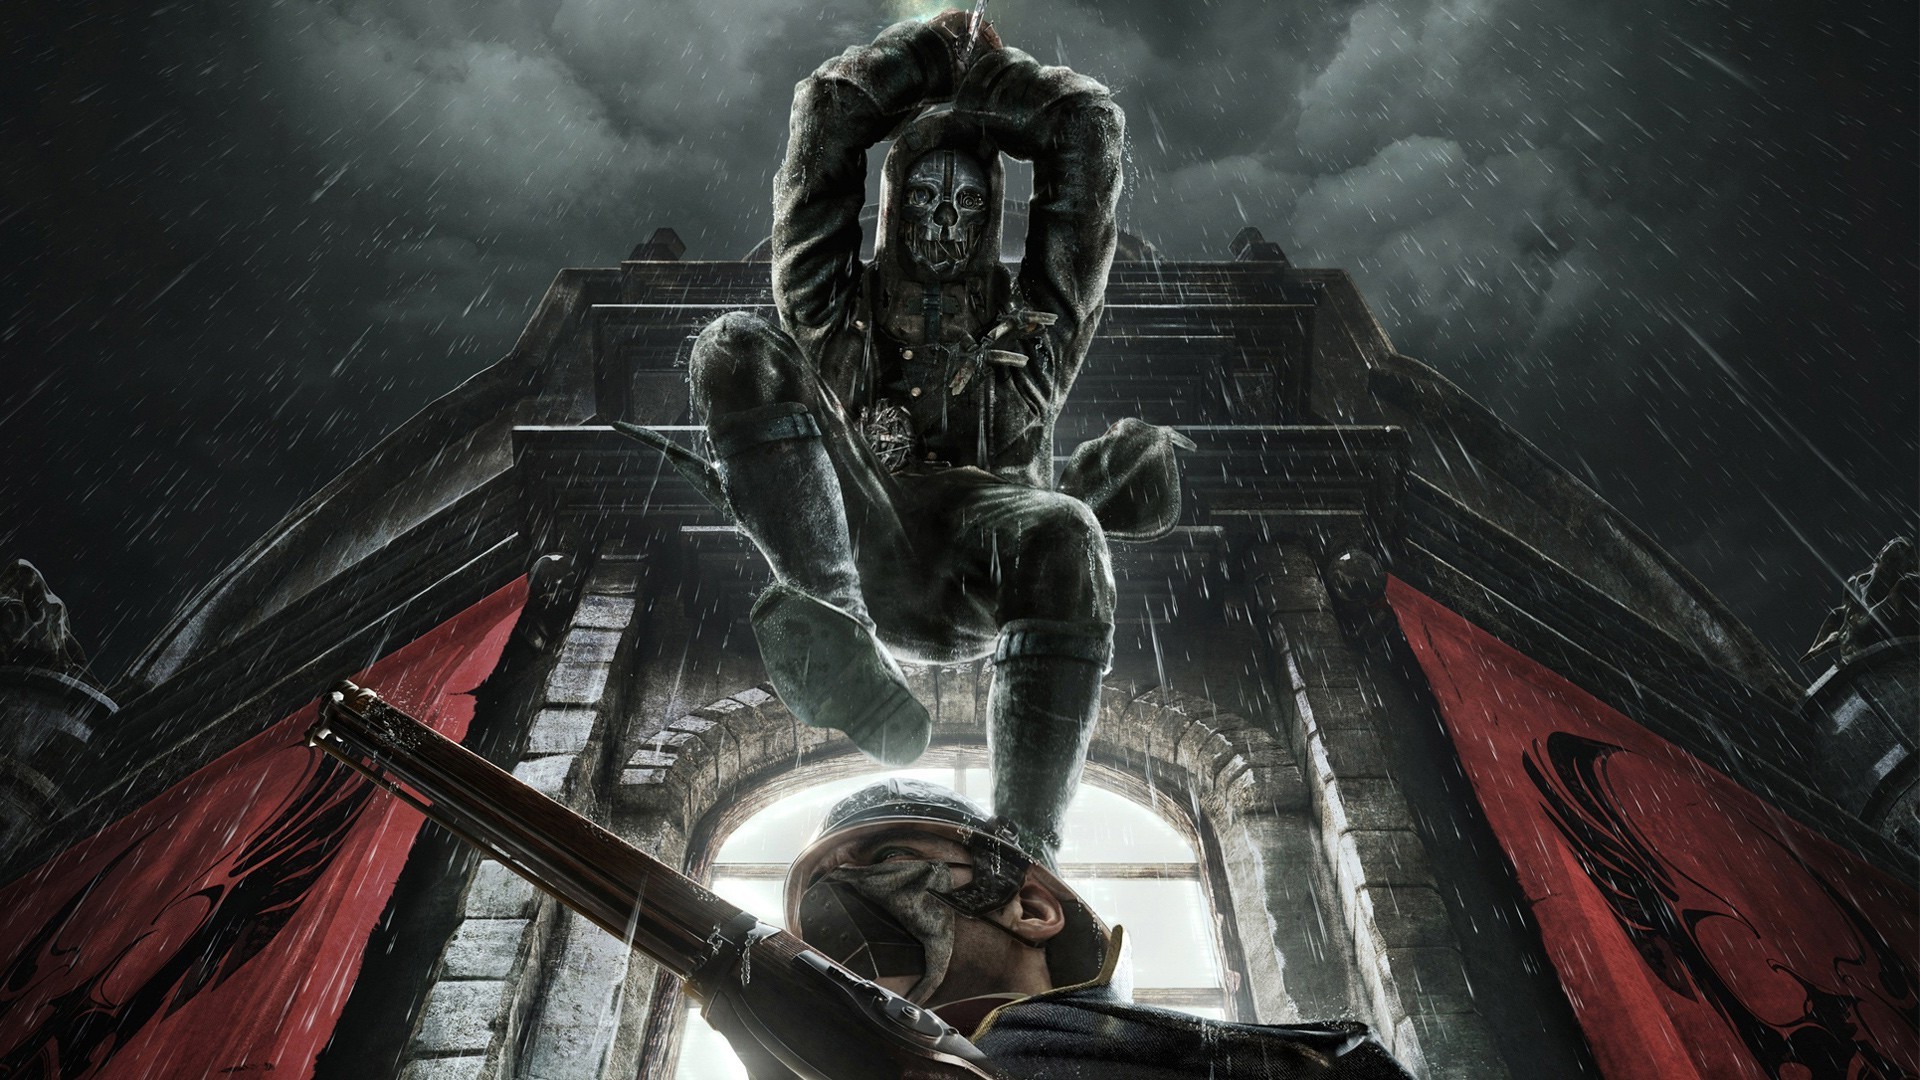 1920x1080 Corvo Attano in Dishonored wallpapers (42 Wallpapers)